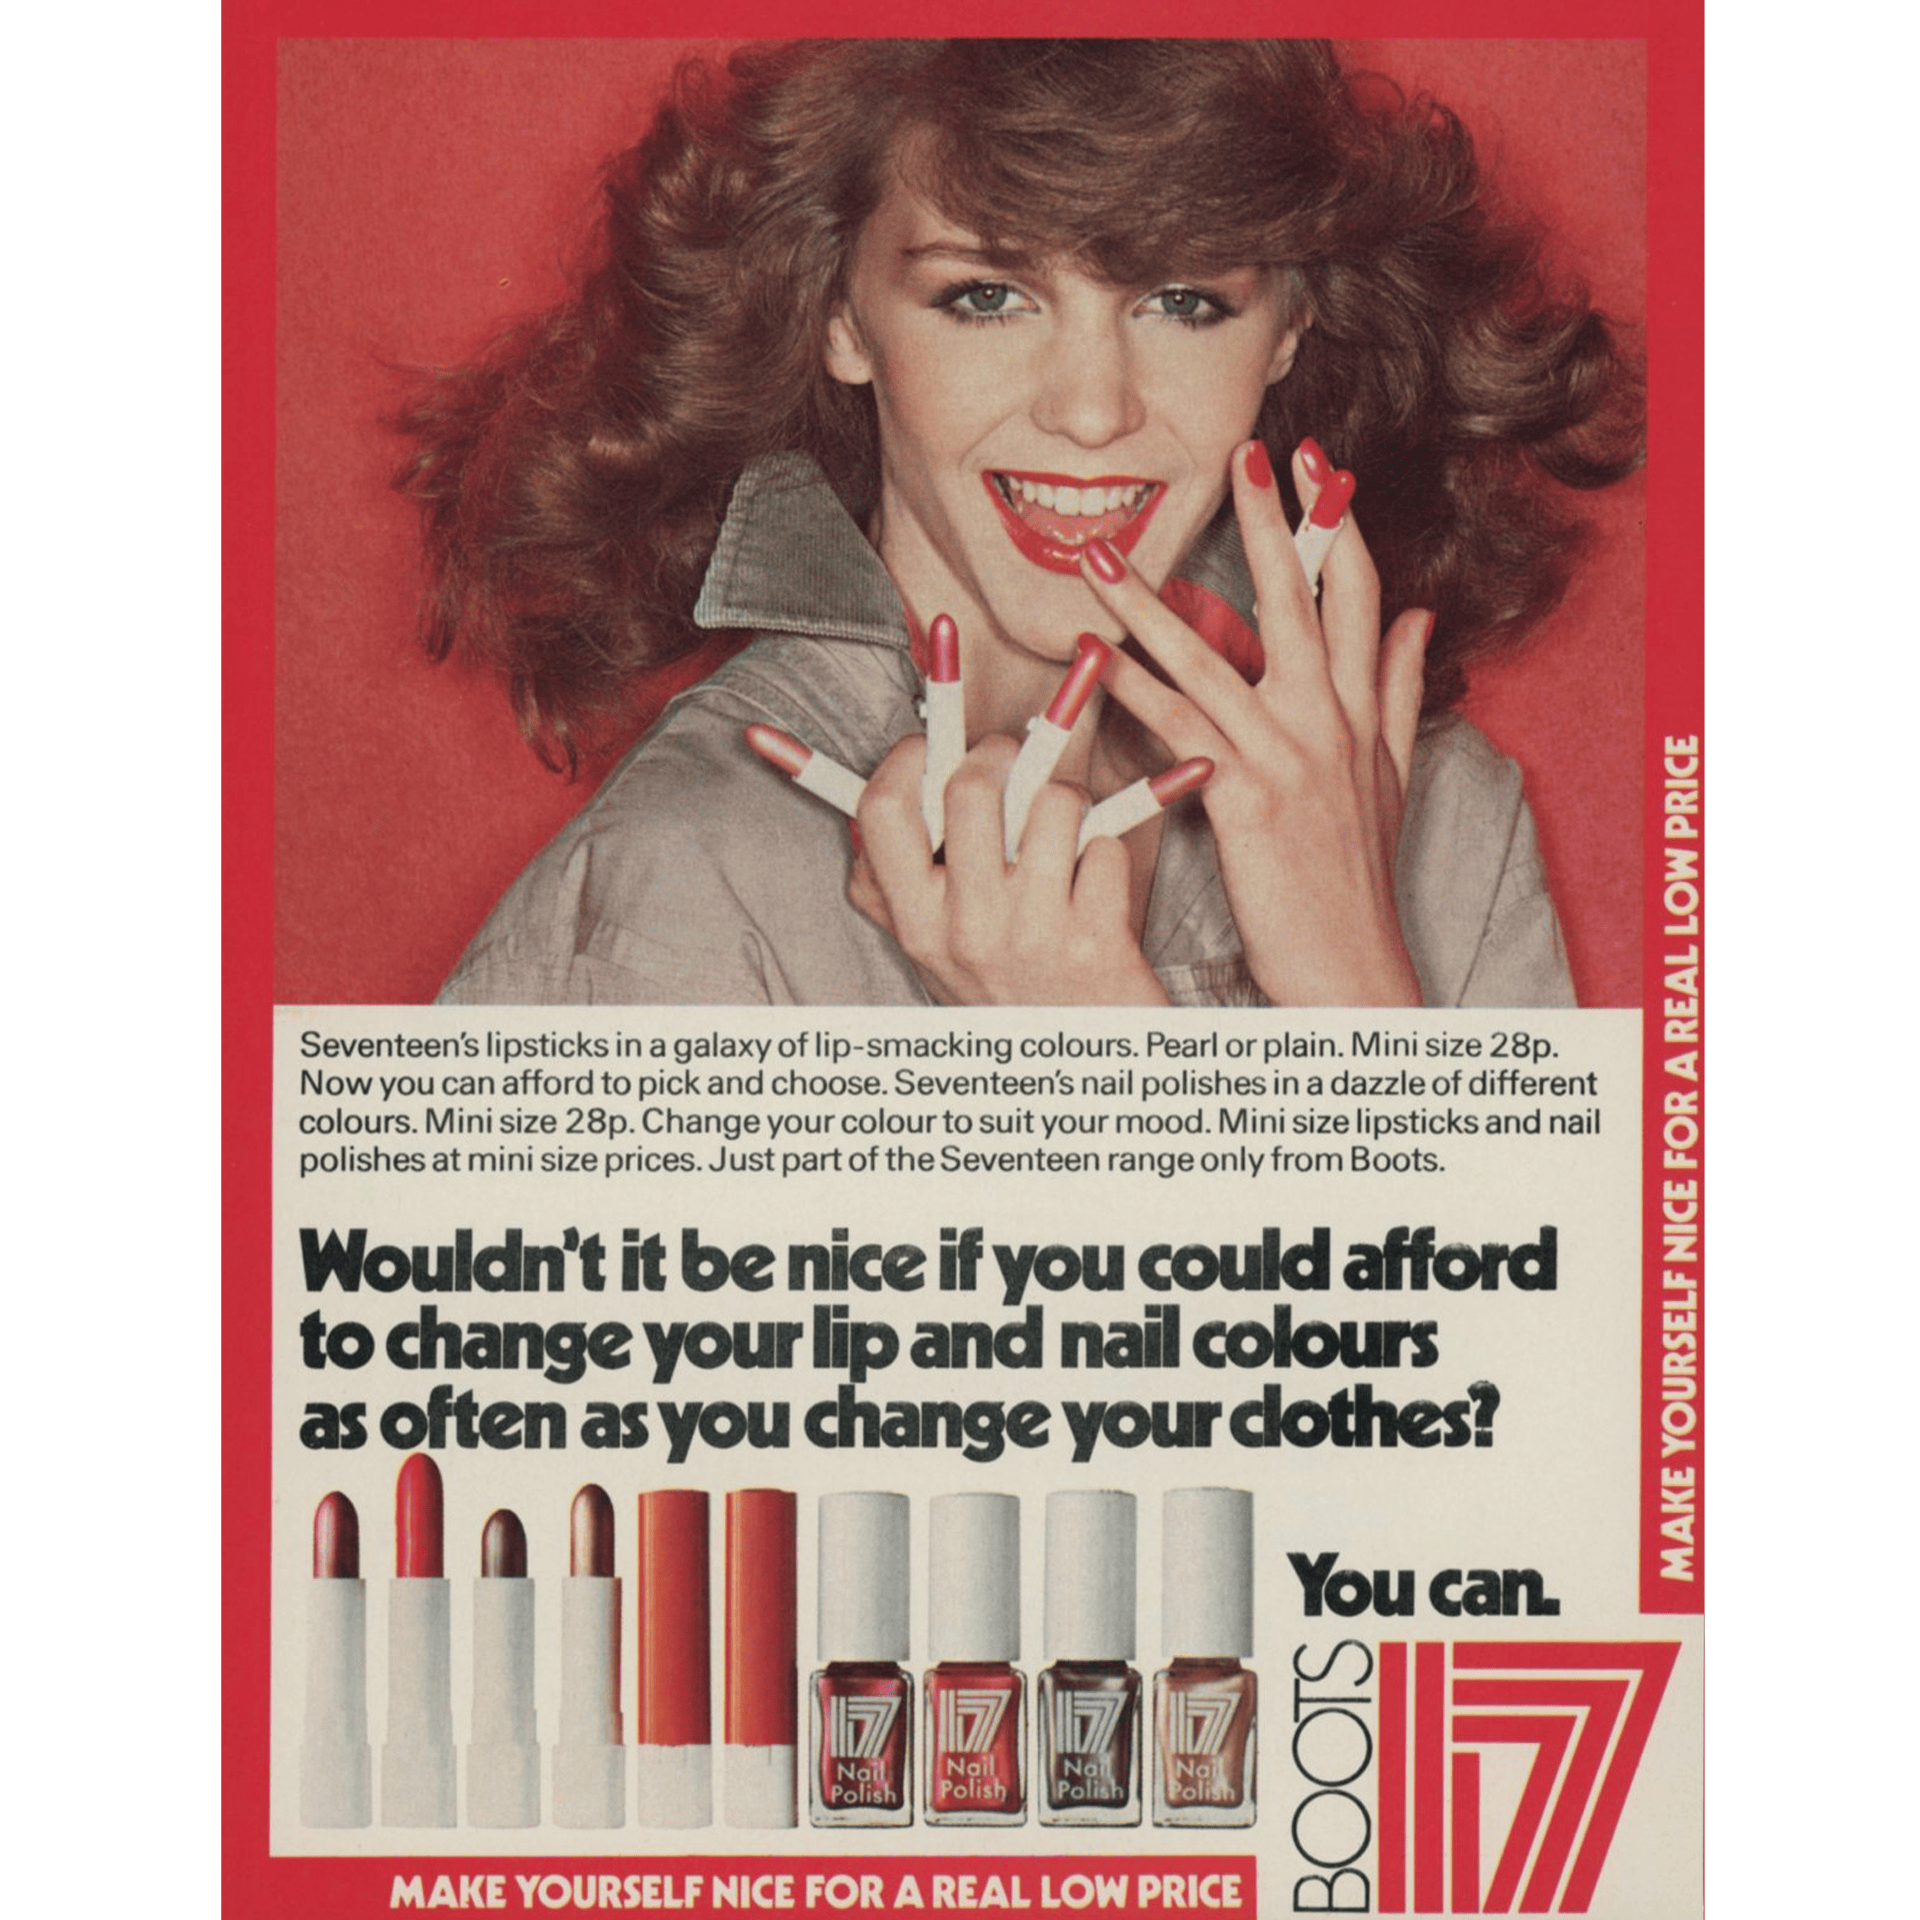 Vintage Boots poster of a teenage girl holding lipsticks